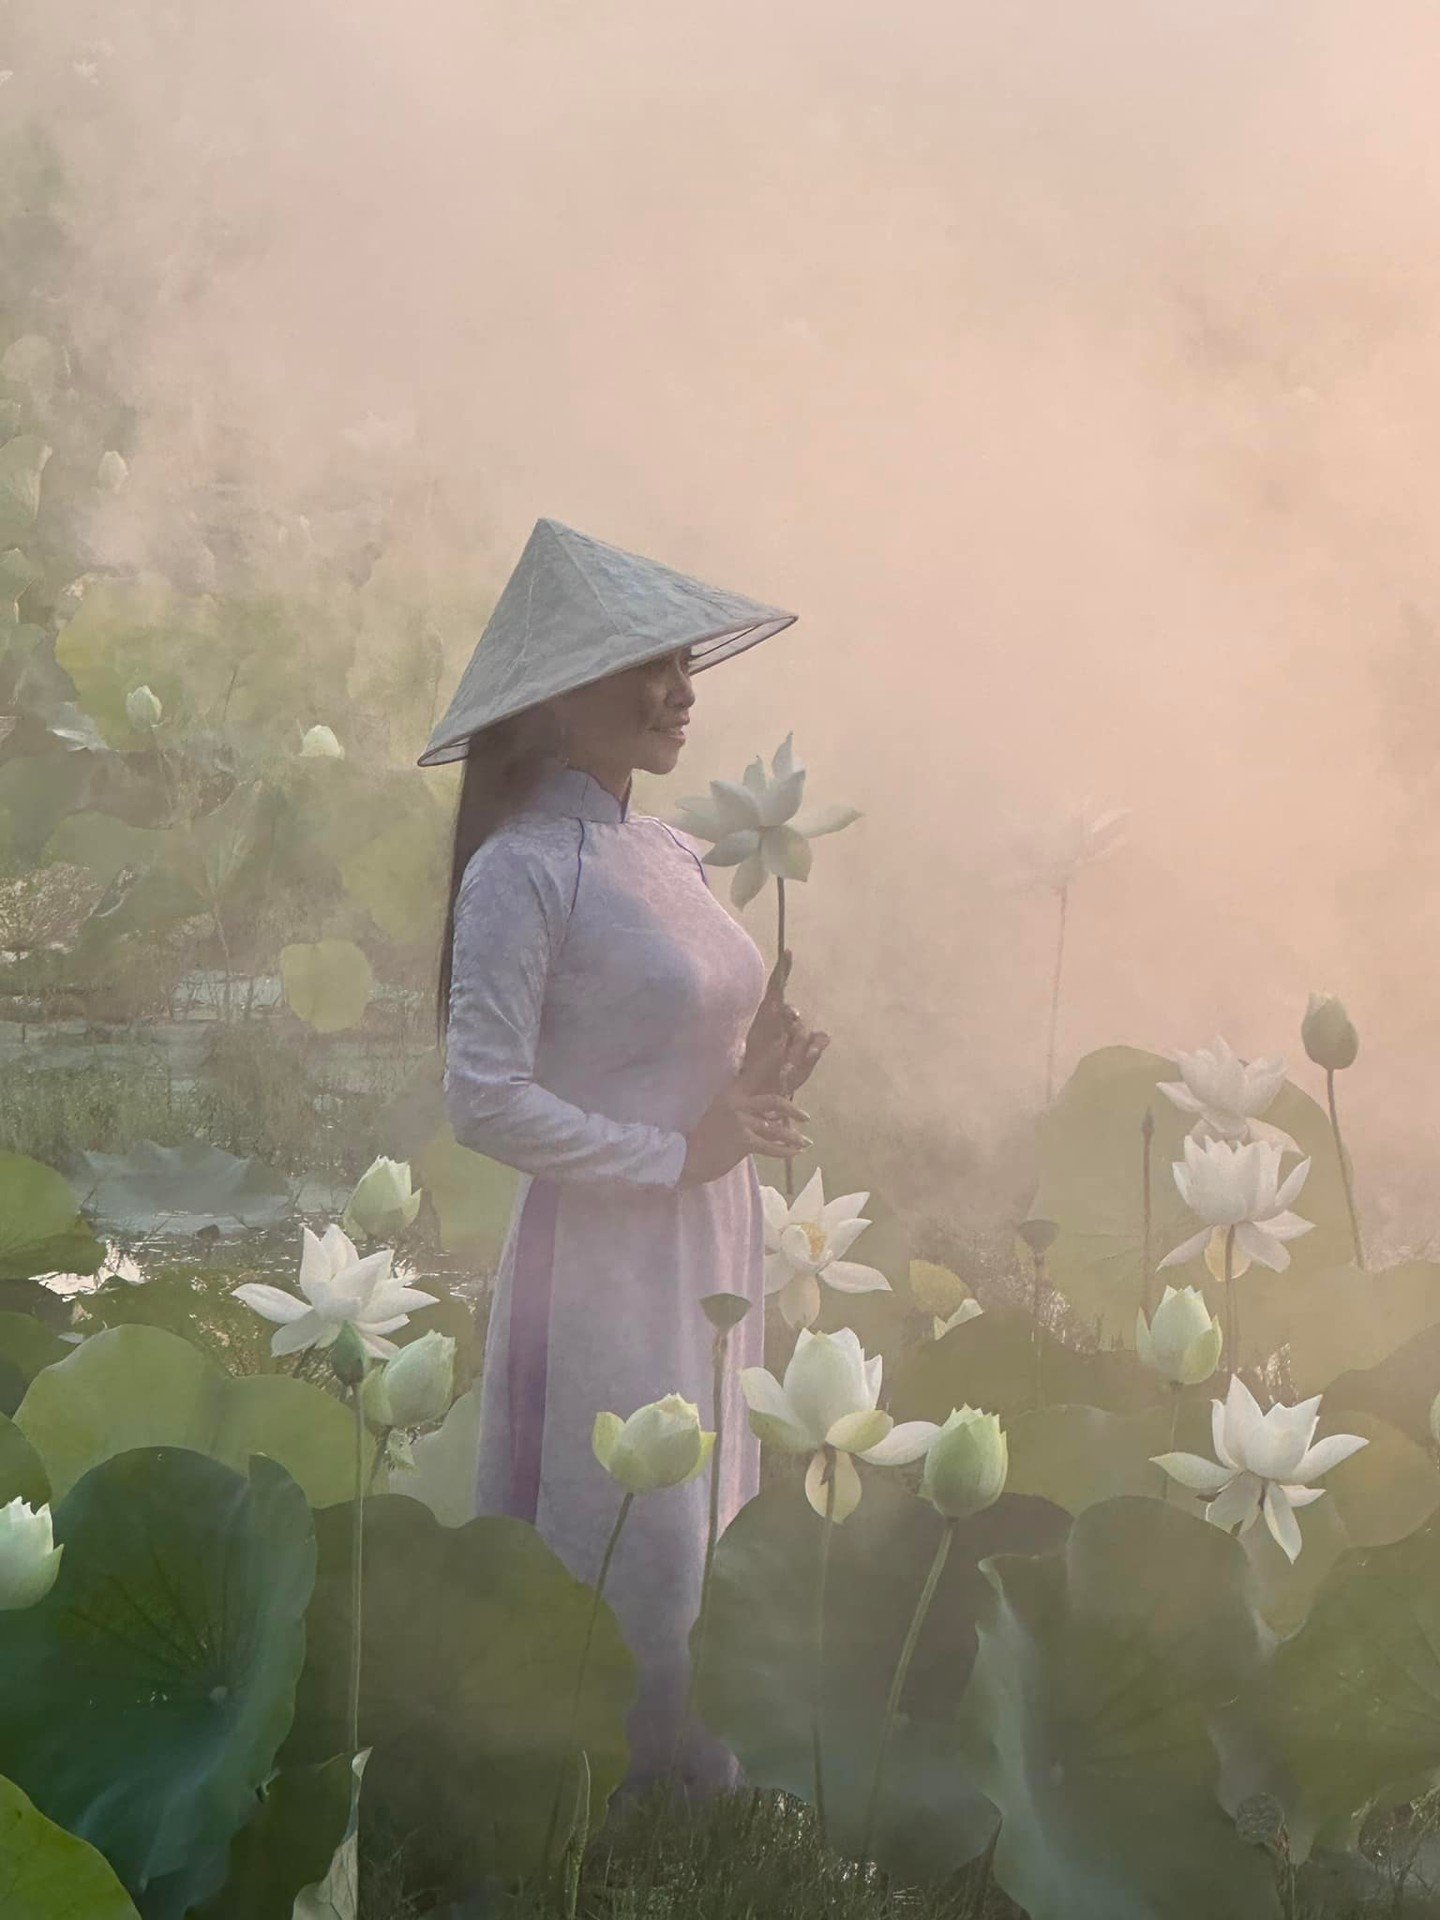 Stunning shot by member Georgina Mays @maysgeorgina capturing a beautiful misty morning in Vietnam!
Georgina writes, &quot;Picking lotus in the early morning mist!&quot;

Want to learn how to take better photos? Become a member today!--&gt; *Link in 